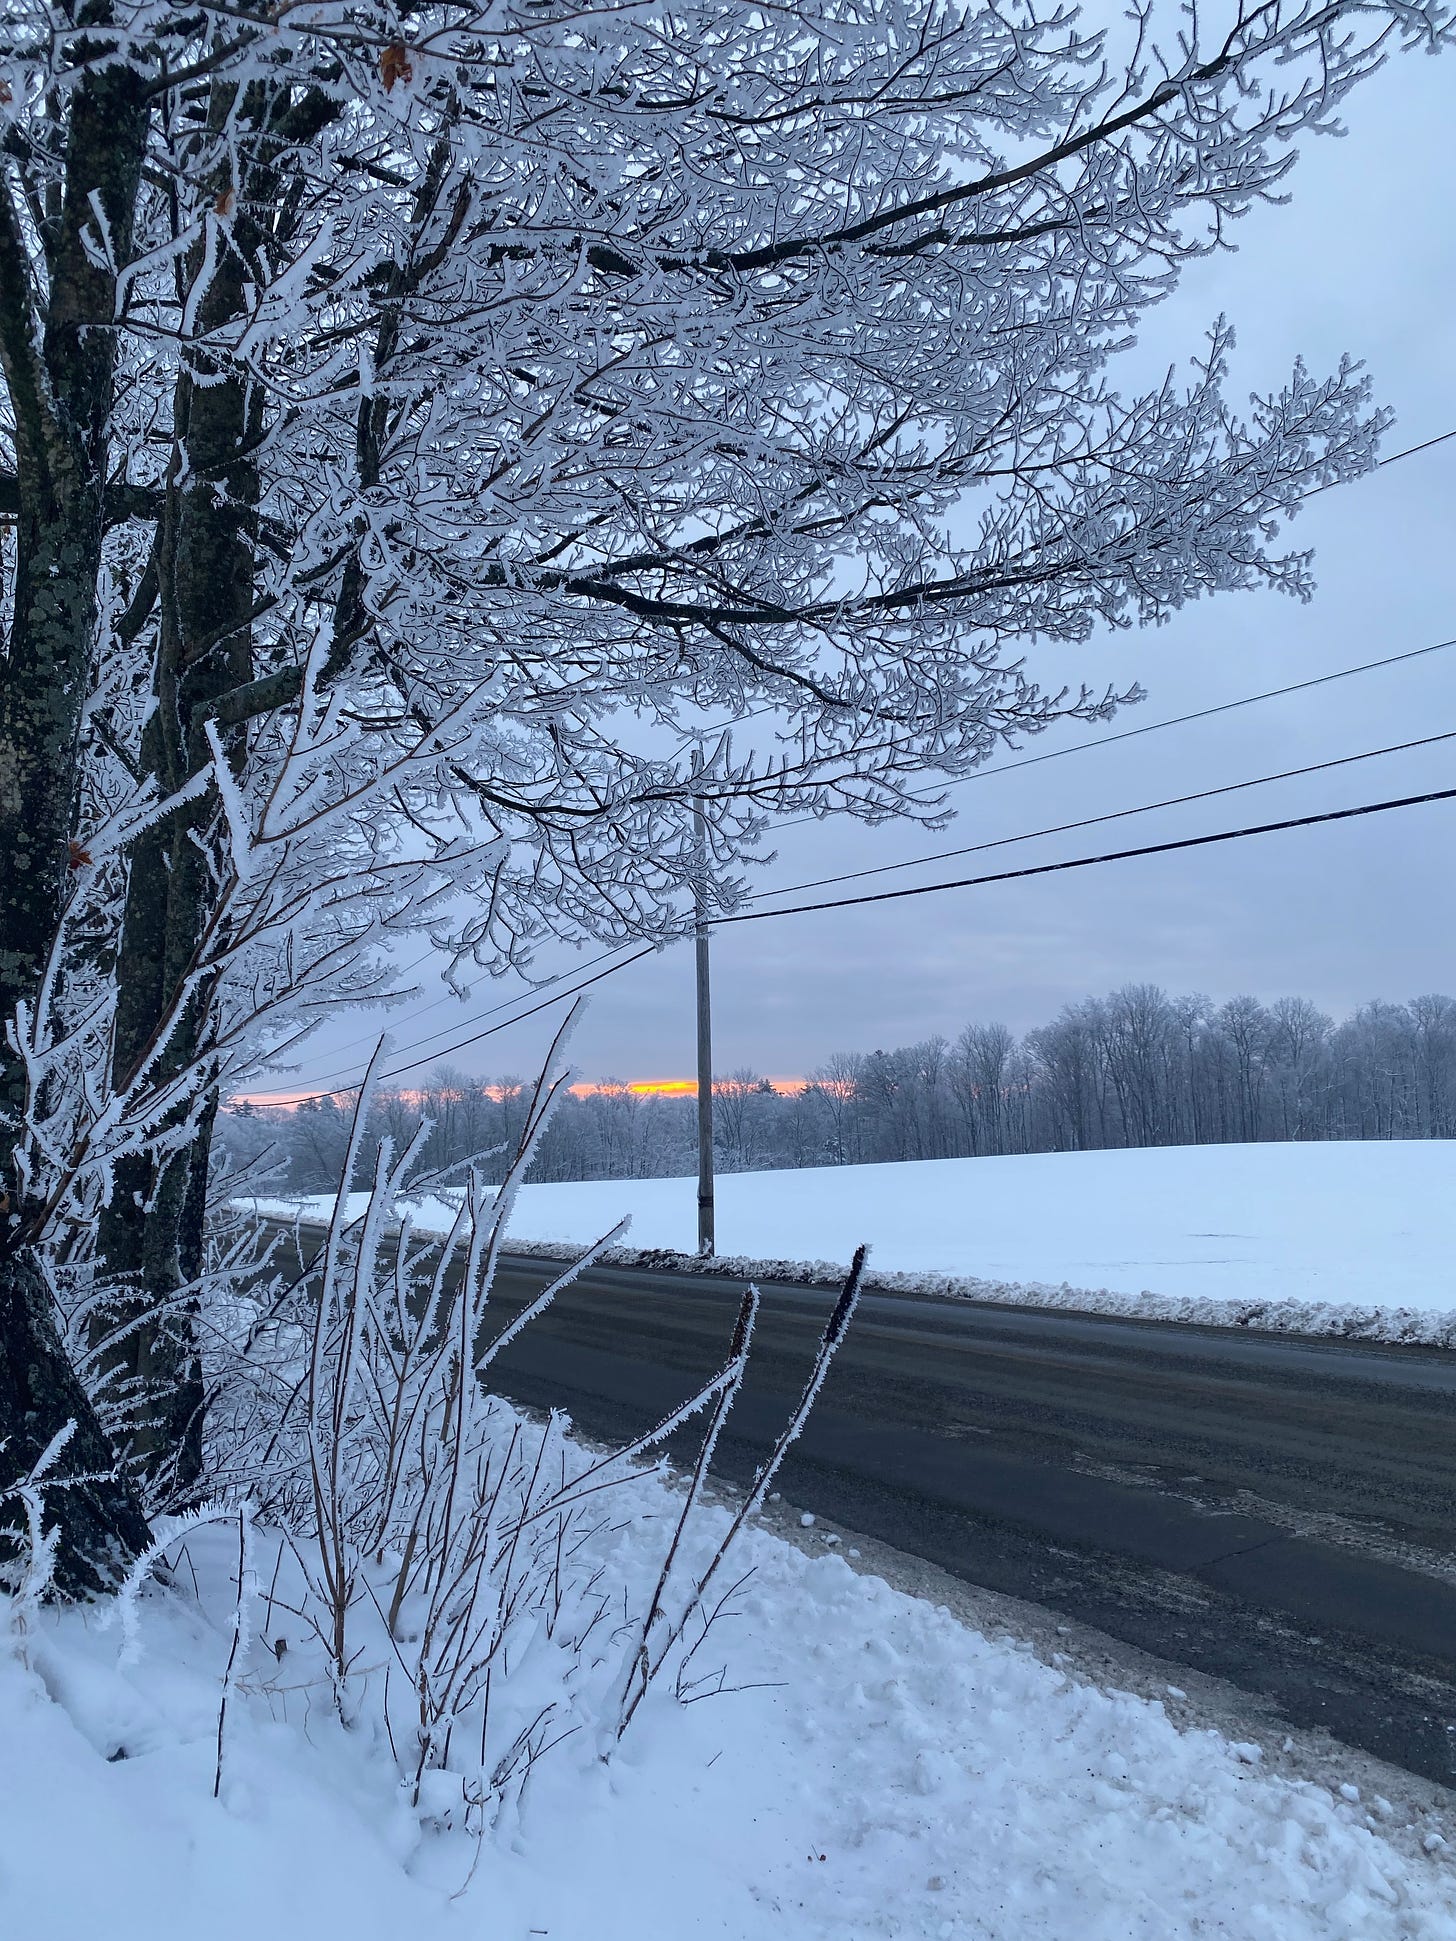 A road at sunrise, surrounded by snowy fields and a tree covered in lacy, delicate snow.